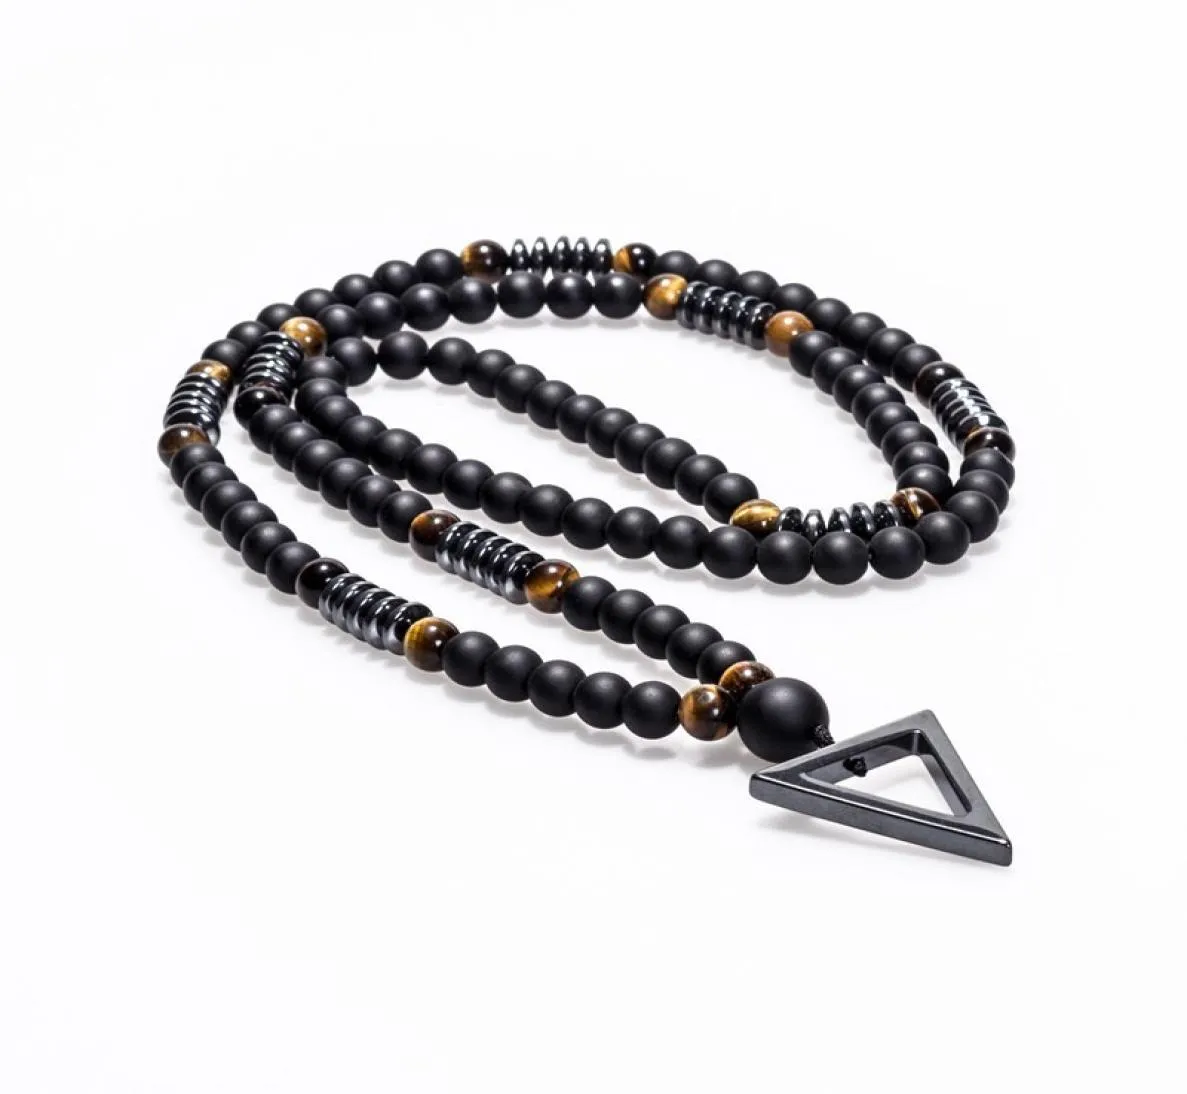 New Design Long Necklace 8MM Tiger Stone Bead Black Men039s Hematite Triangle Pendants Necklace Fashion Geometry Jewelry Gift5422235